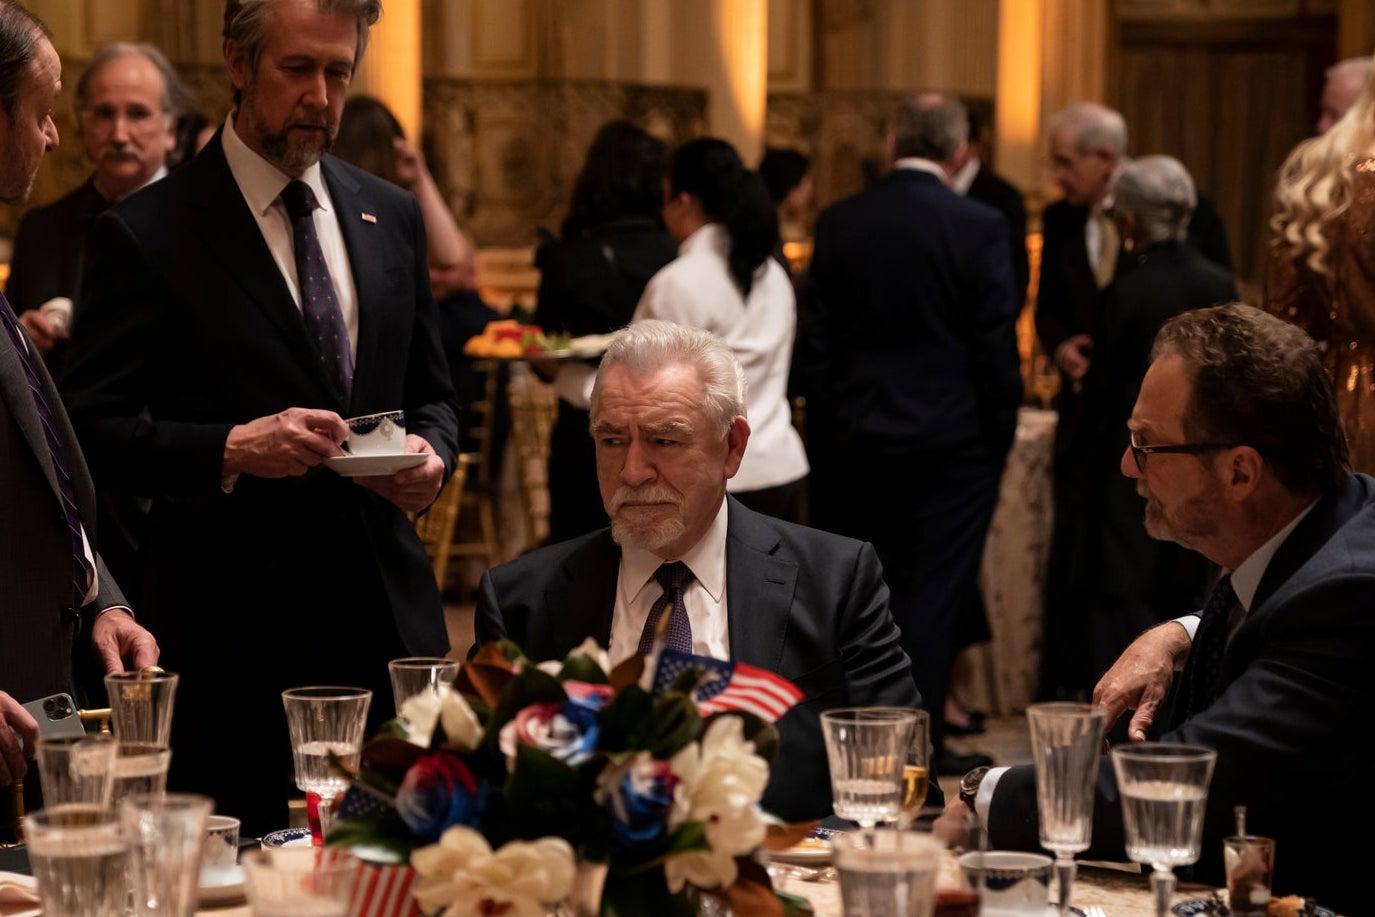 Patriarch Logan Roy at a banquet table surrounded by powerful interests.